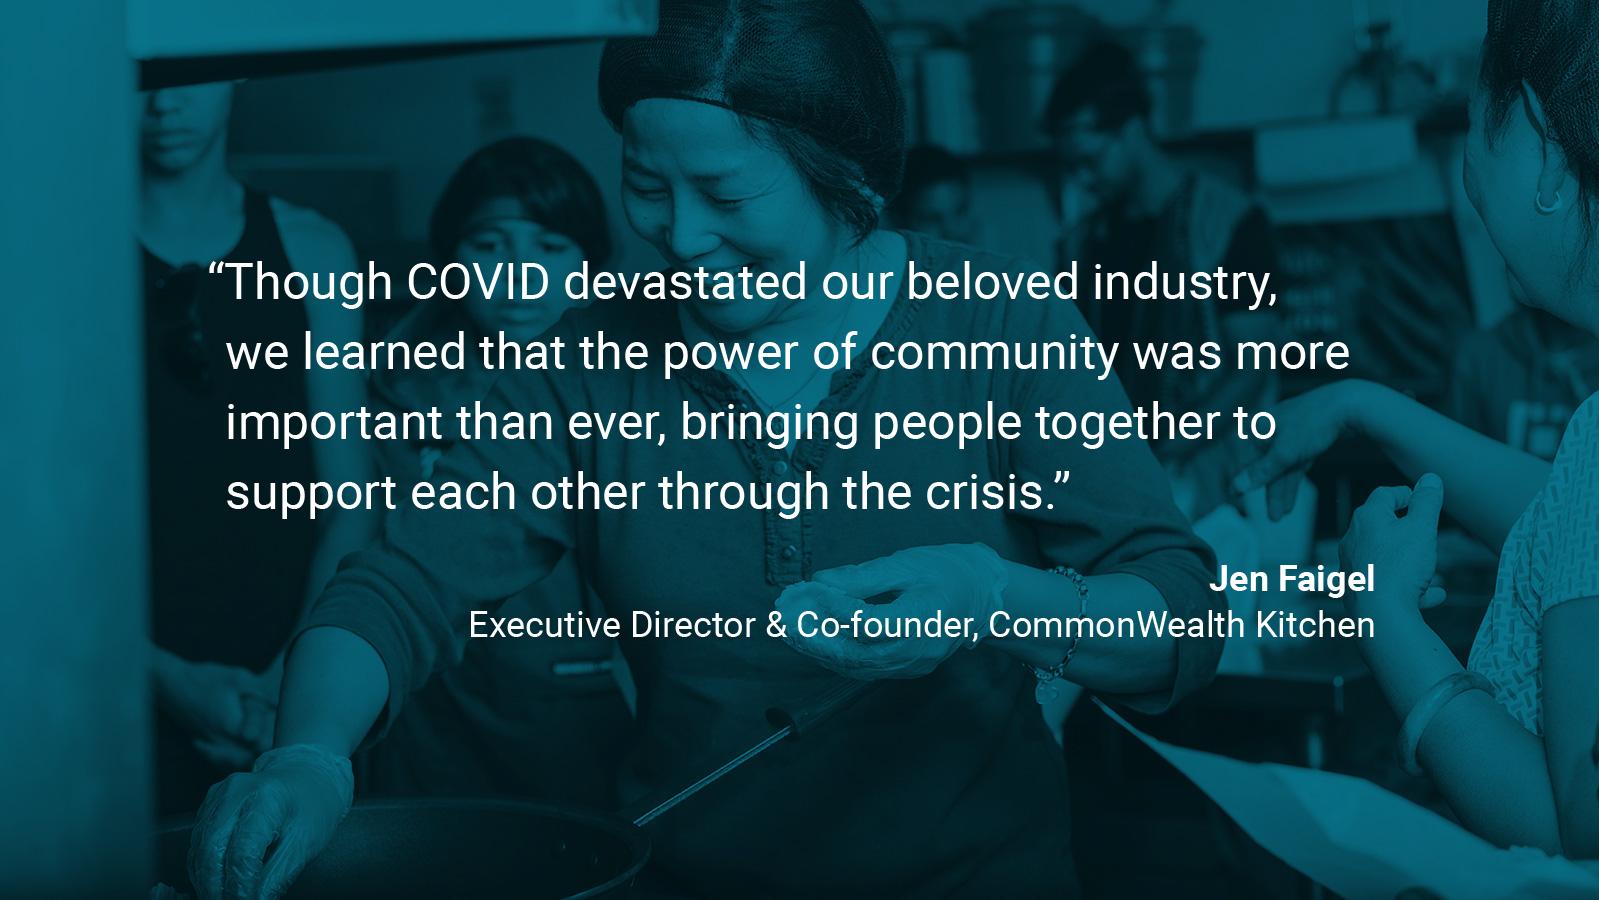 (slide 1 of 4) Quote by: Jen Faigel, Executive Director and Co-Founder of CommonWealth Kitchen:  “Though COVID devastated our beloved industry, we learned that the power of community was more important than ever, bringing people together to support each other through the crisis.” . 